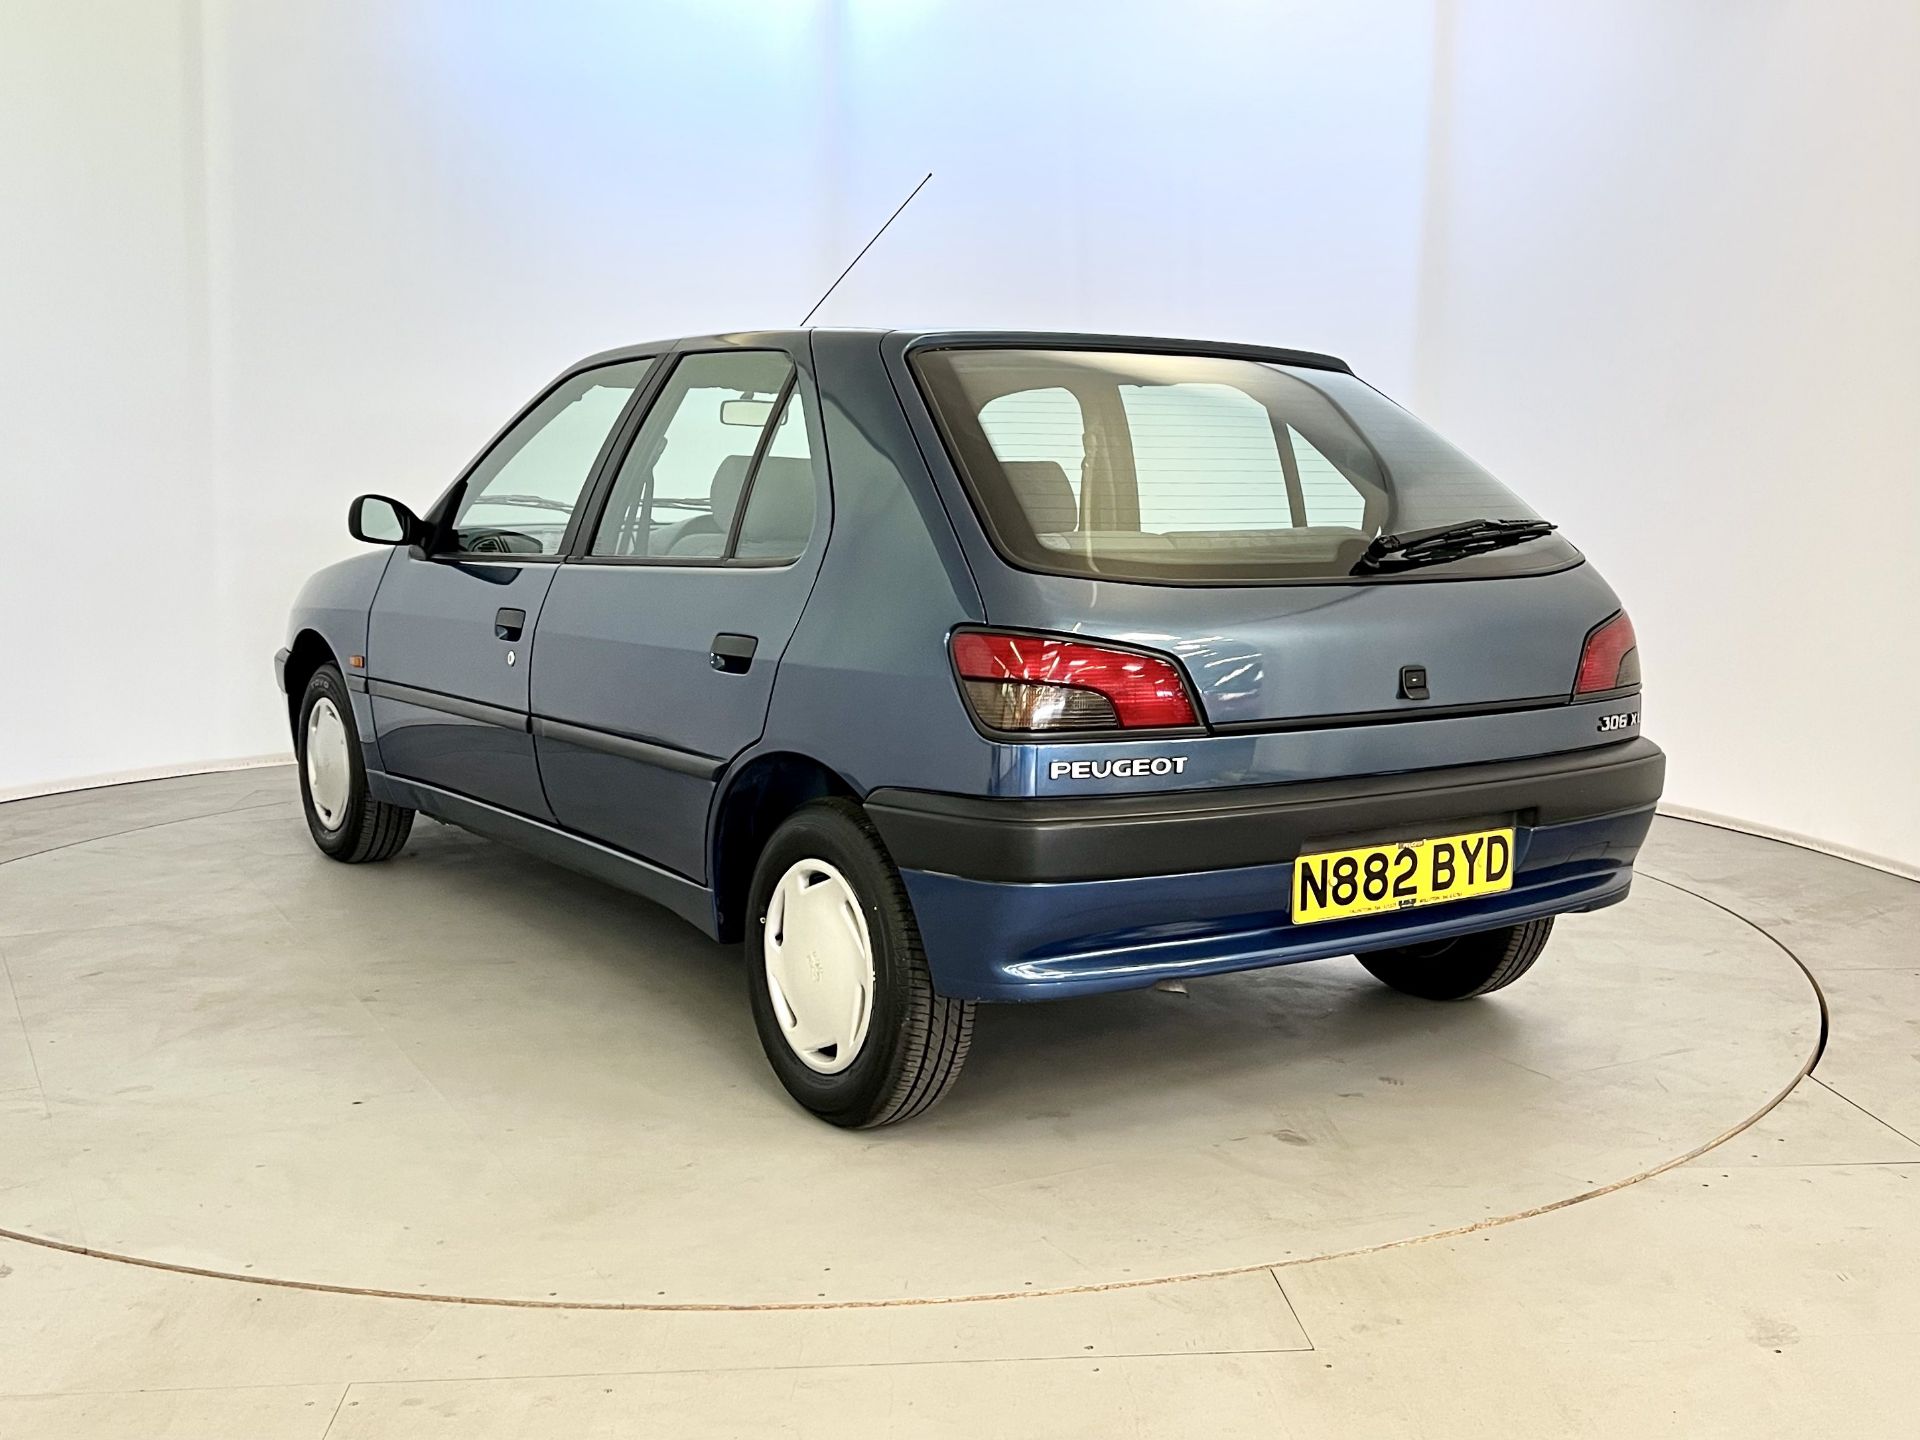 Peugeot 306 - Image 7 of 36